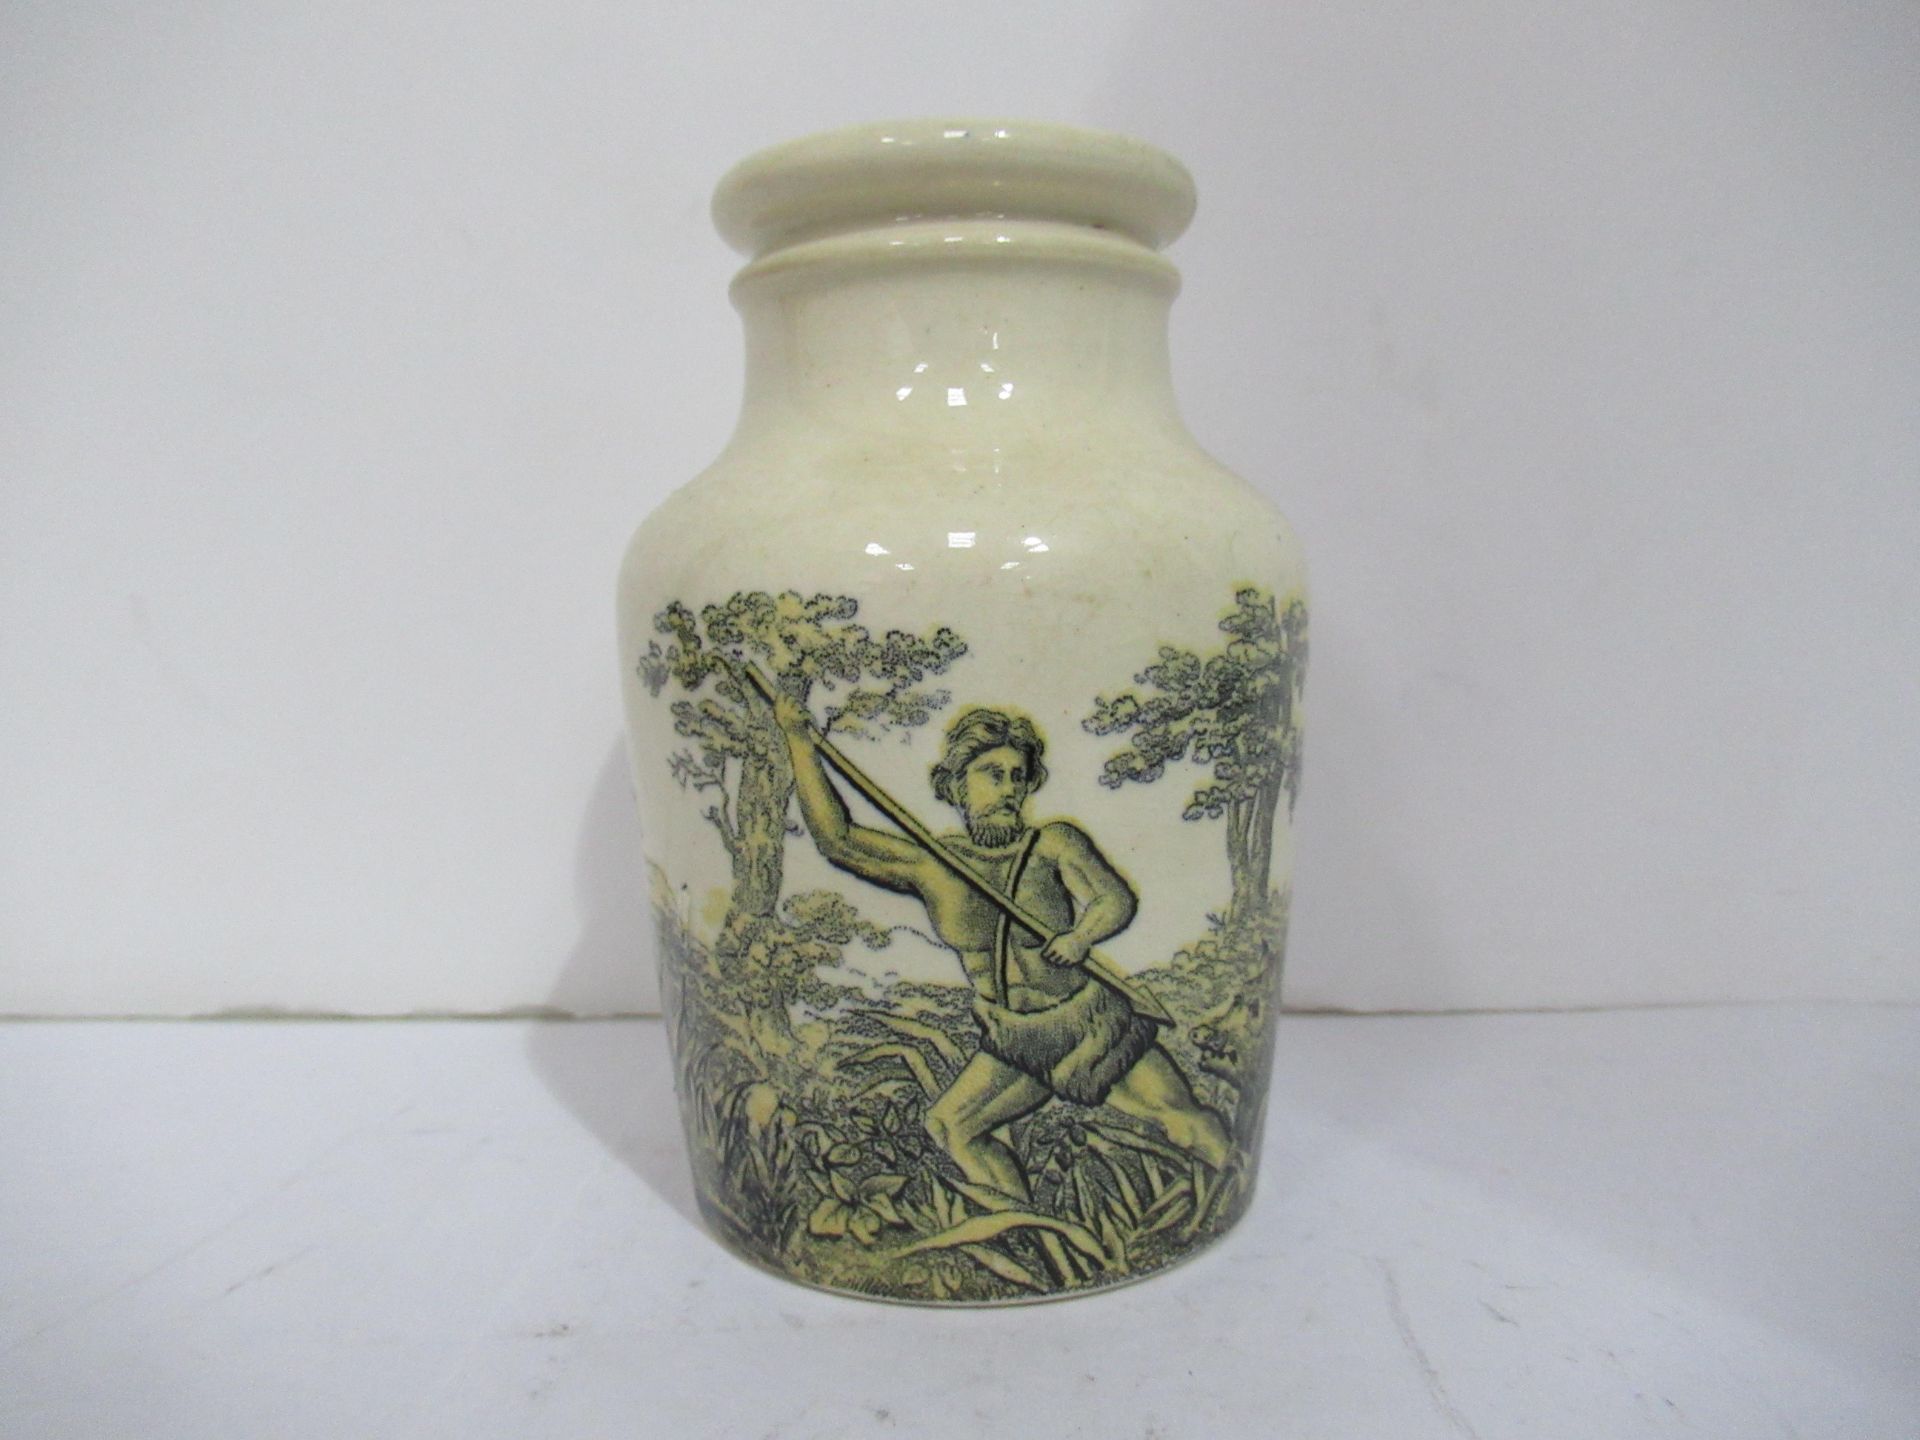 6x Prattware painted jars including one depicting Venice - Image 15 of 42